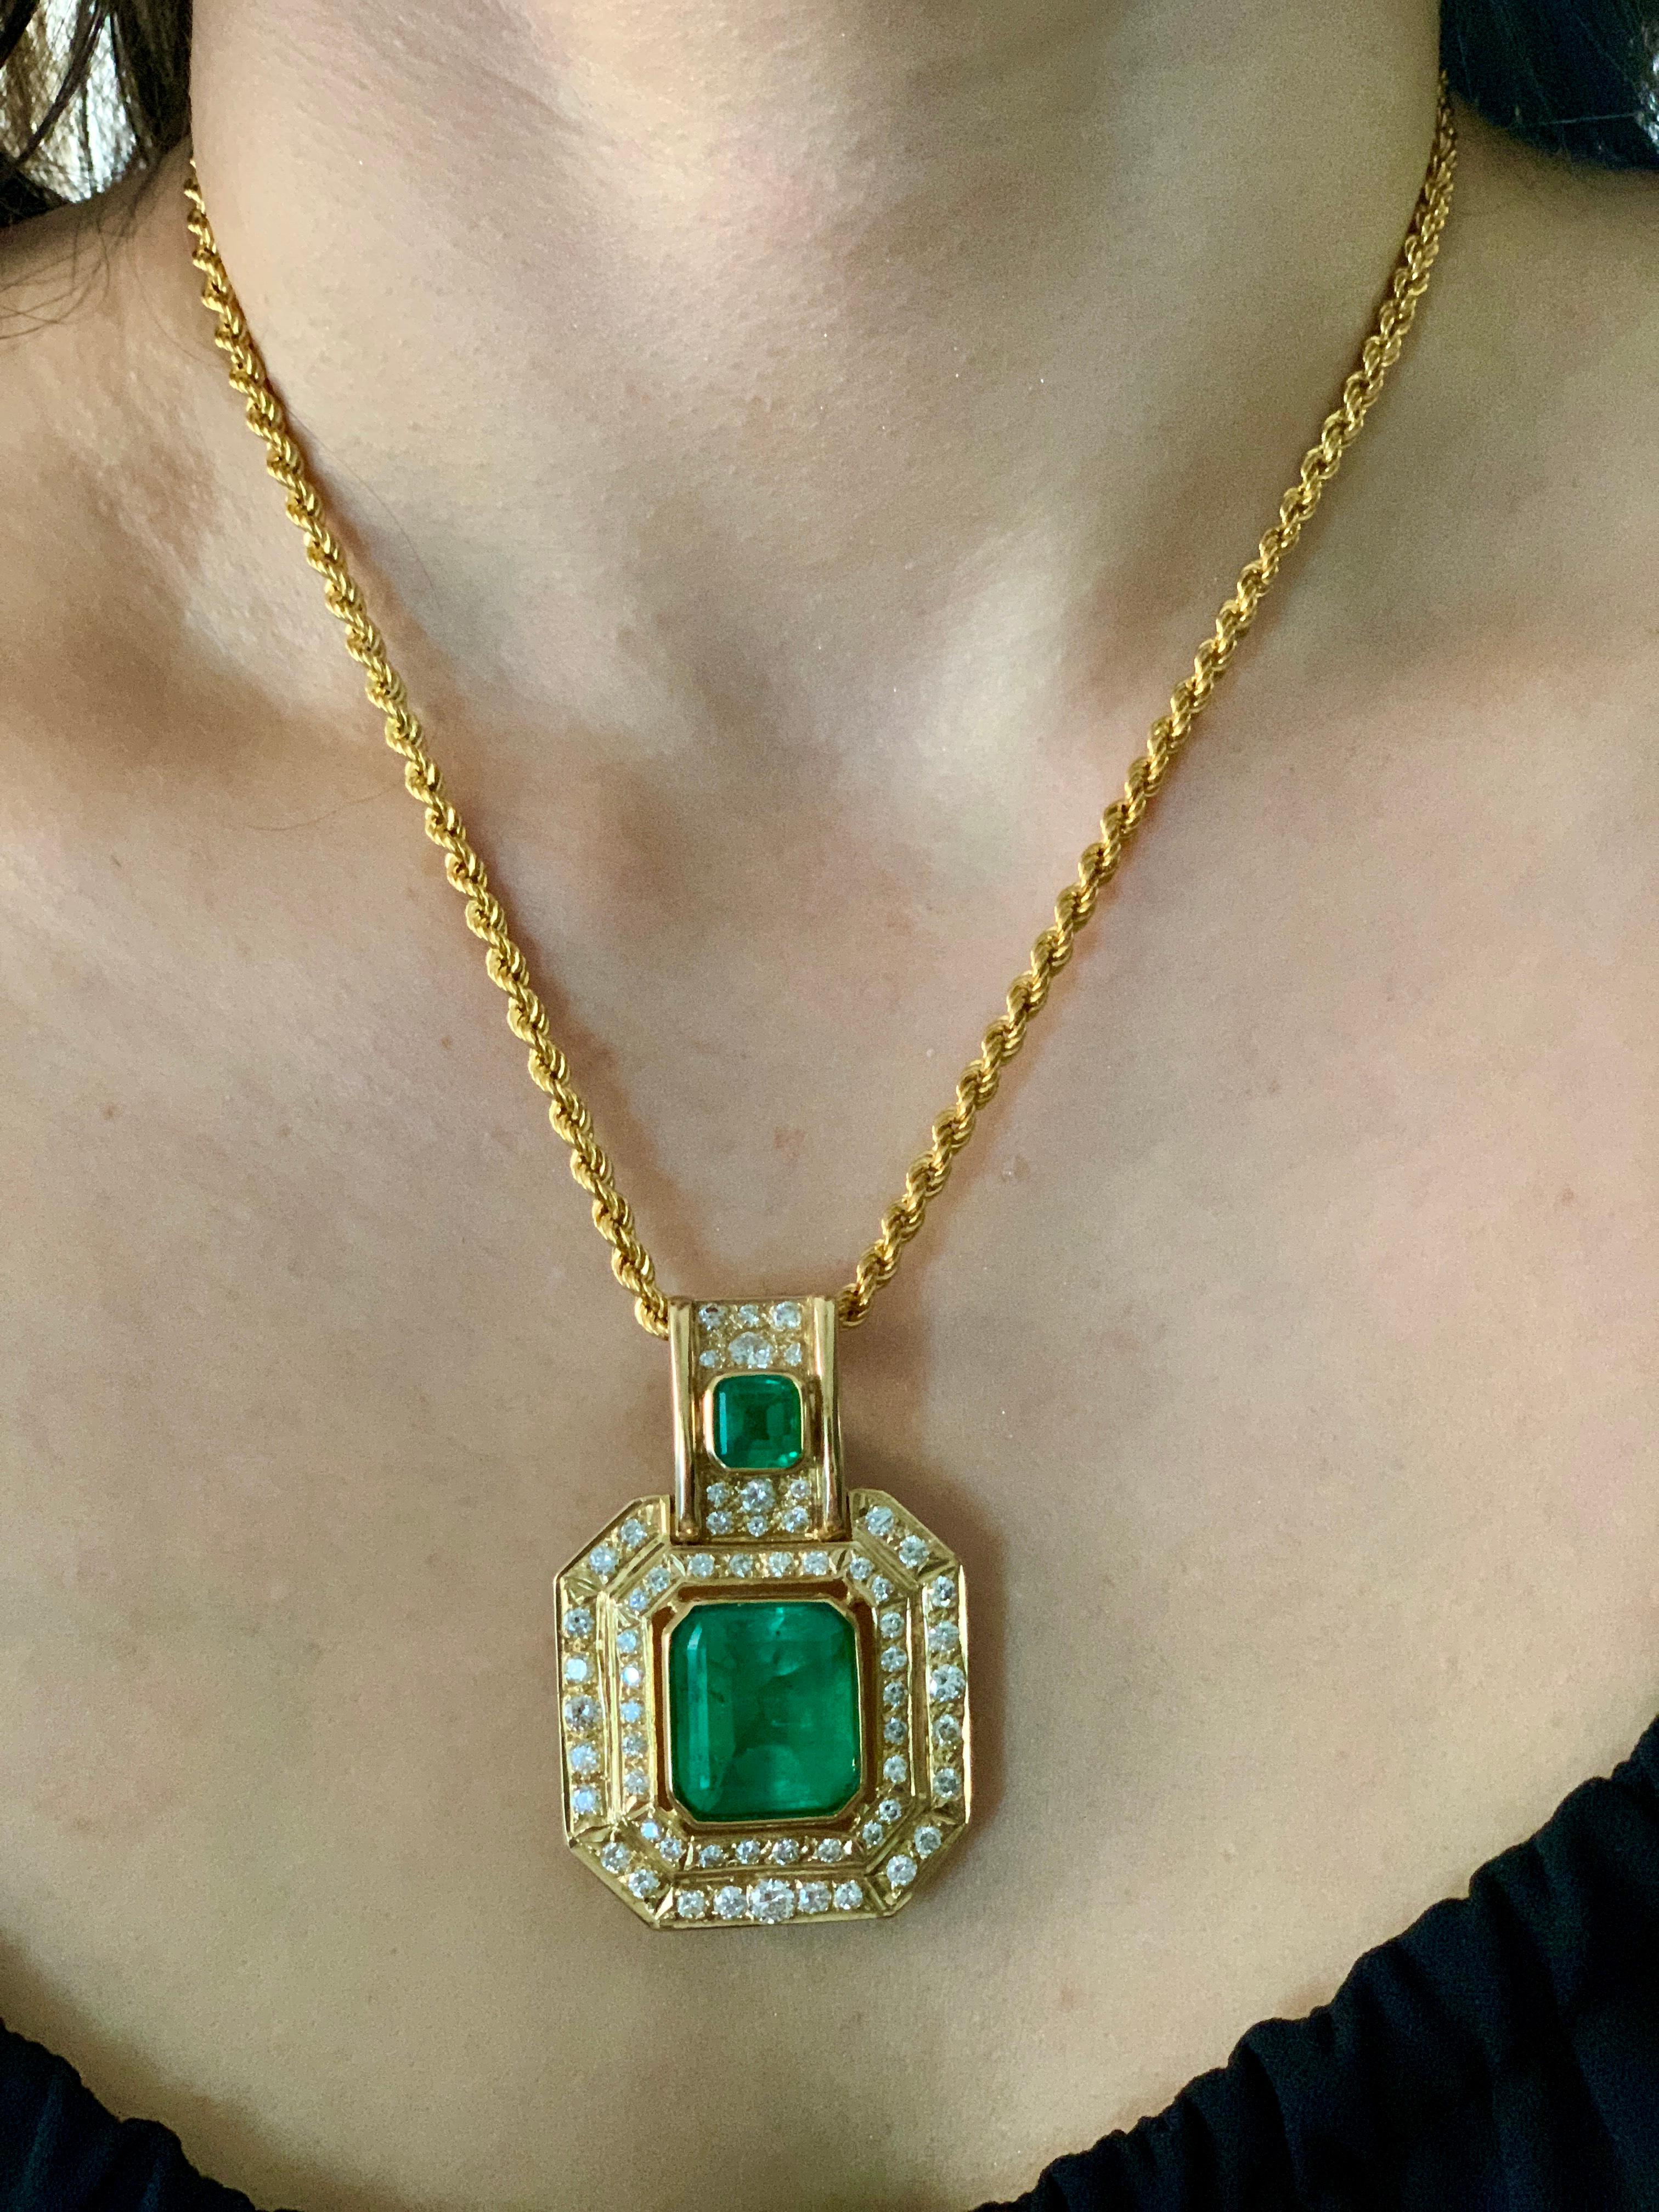 Women's AGL Certified Minor 20 Ct Colombian Emerald & 5 Ct Diamond Pendent/Necklace 14K